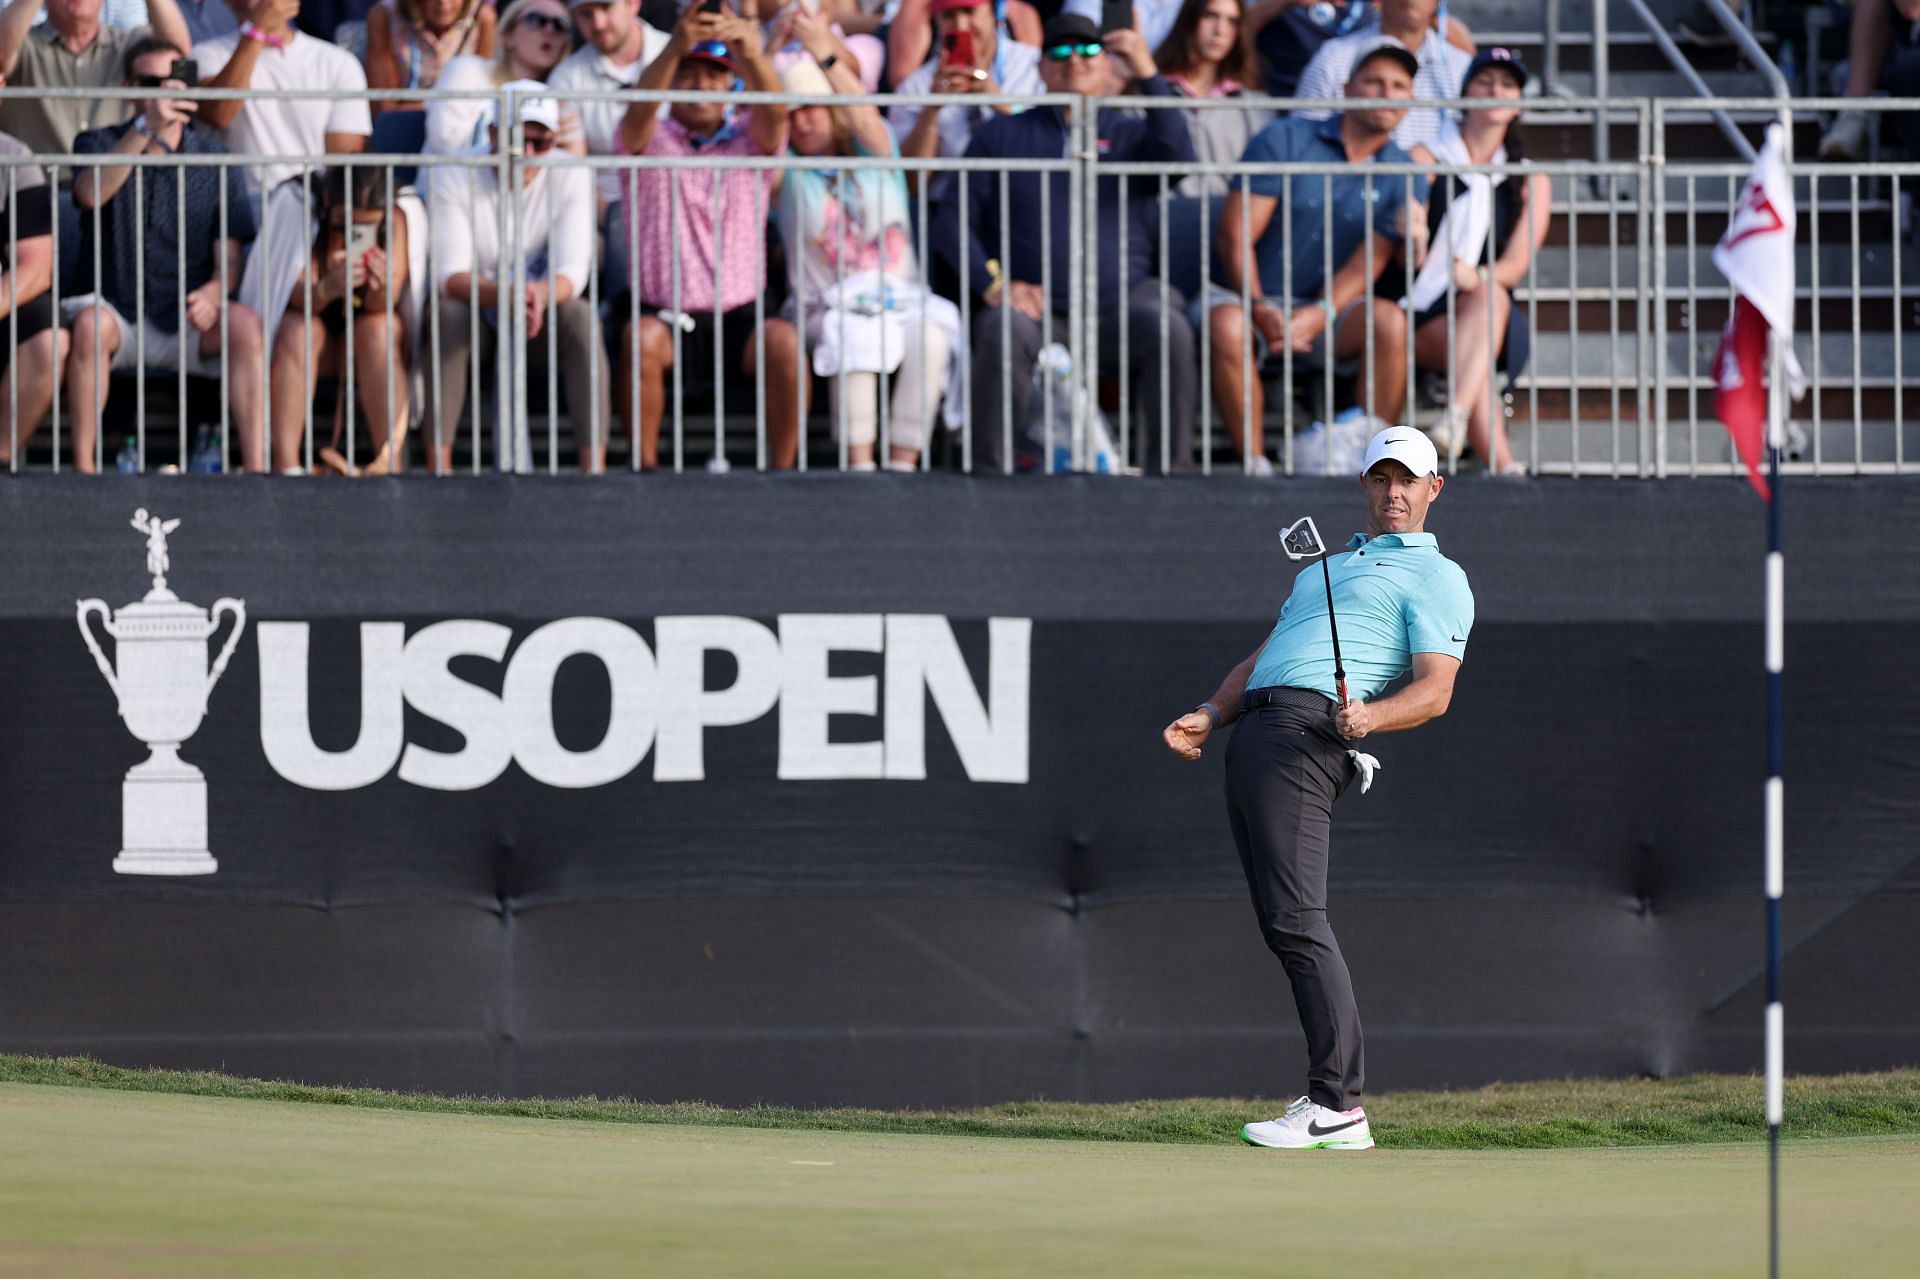 Rory McIlroy came up short at the US Open